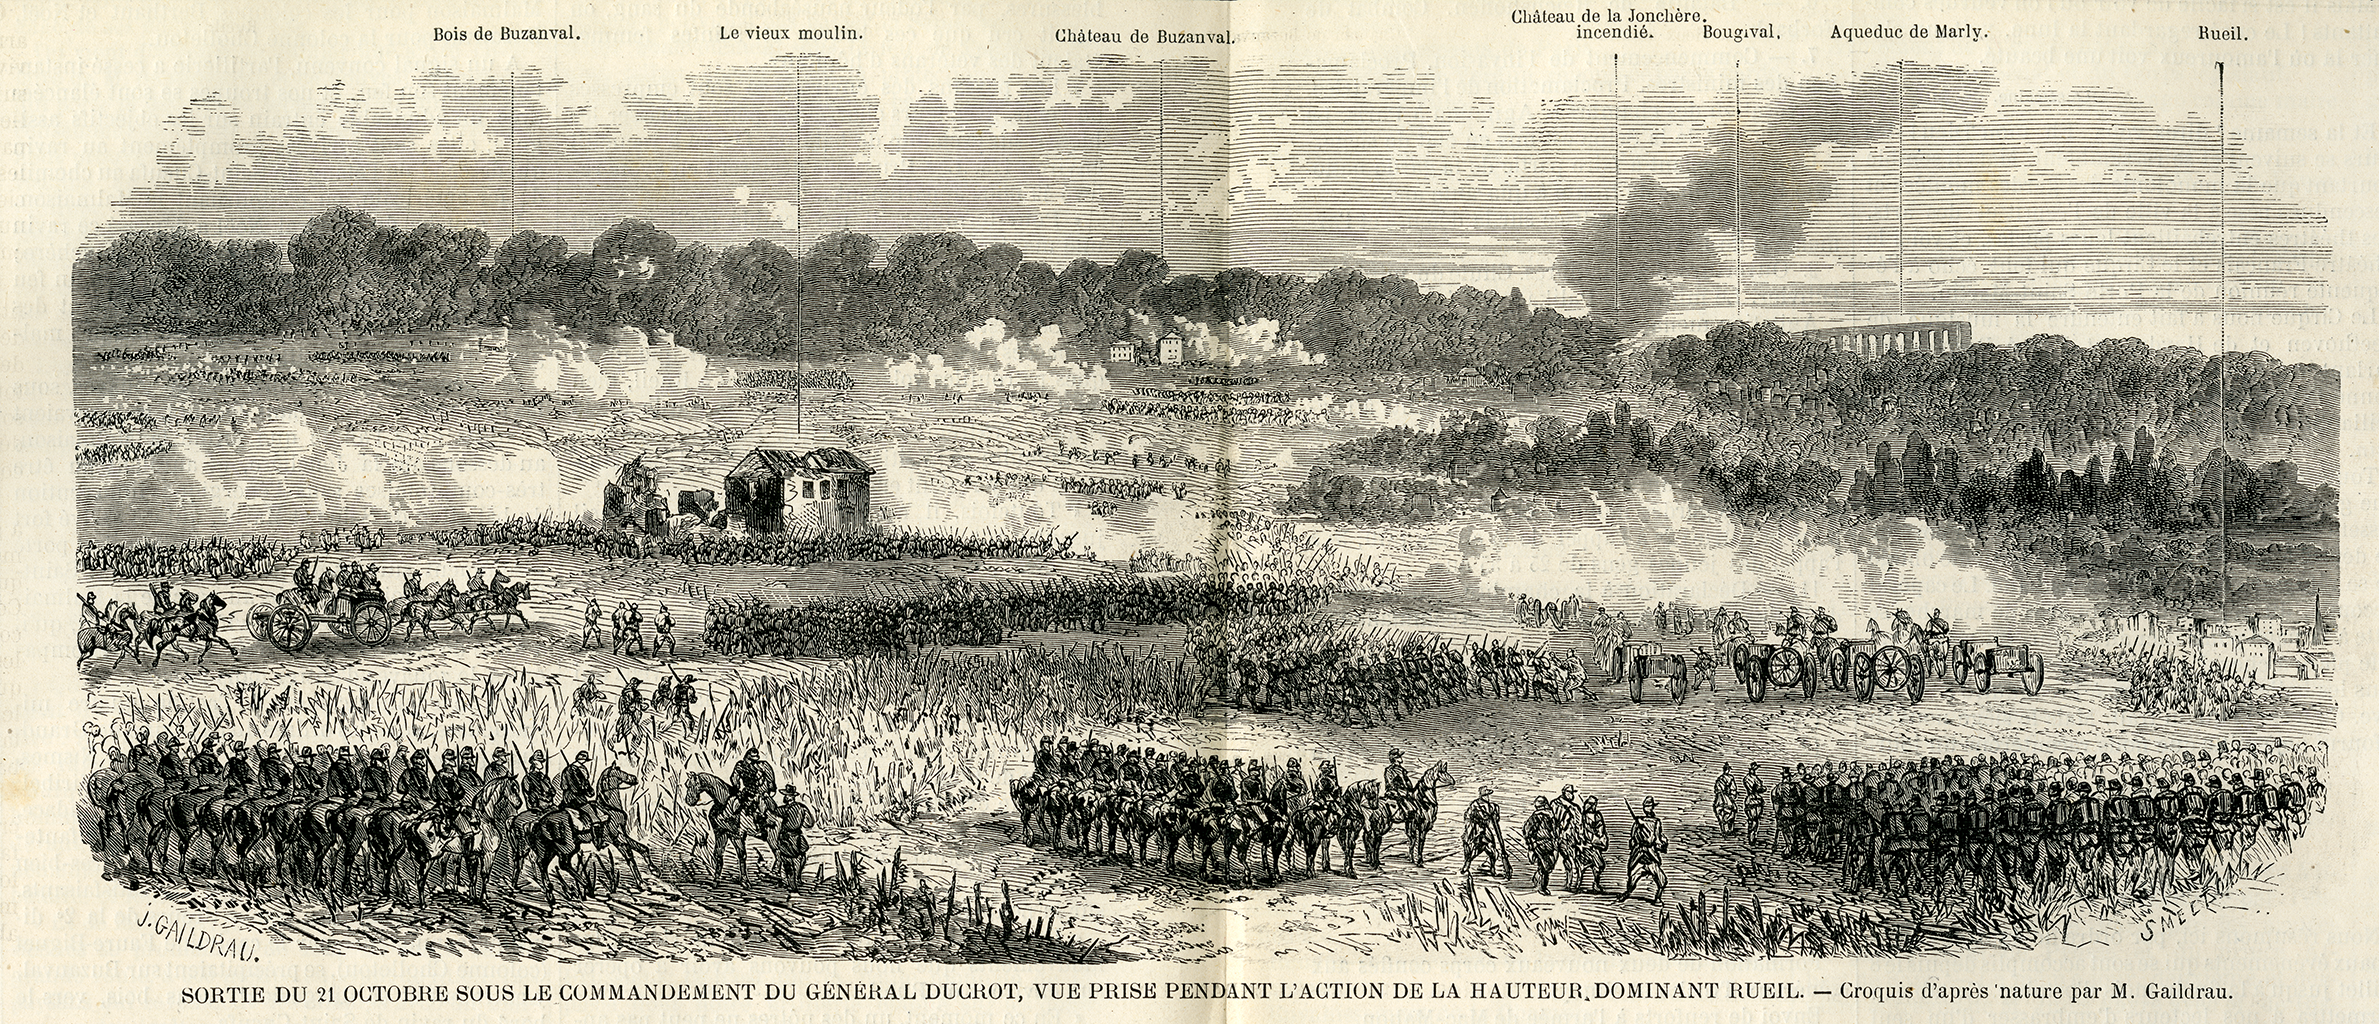 A photograph of a black and white print depicting large groups of soldiers and cavalry overlooking a vast battlefield. The grass and dirt field has smoke and buildings scattered around. In the background, there is a forest lined with trees.